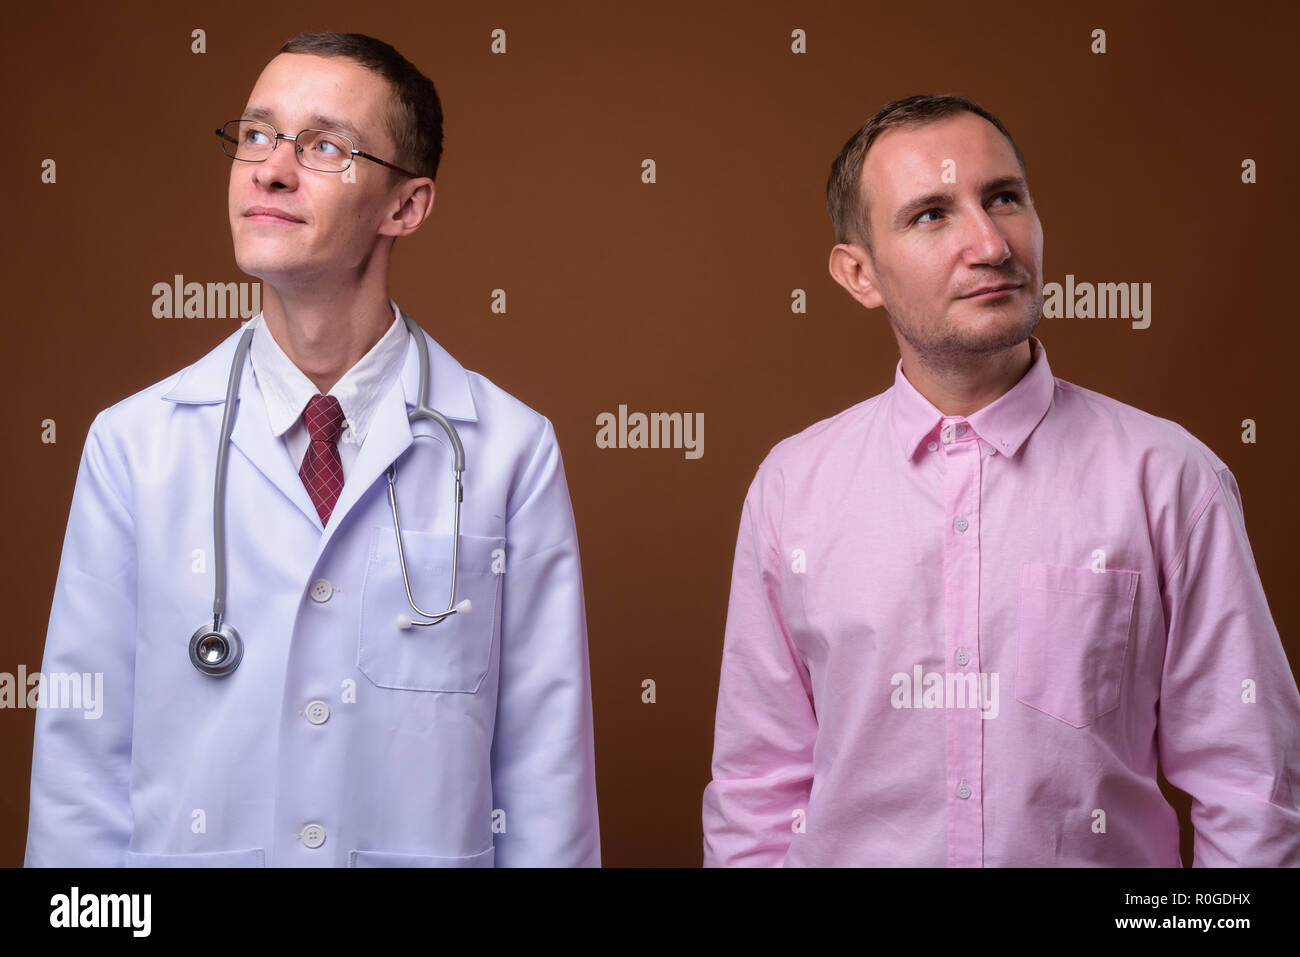 Young man doctor and man patient against brown background Stock Photo